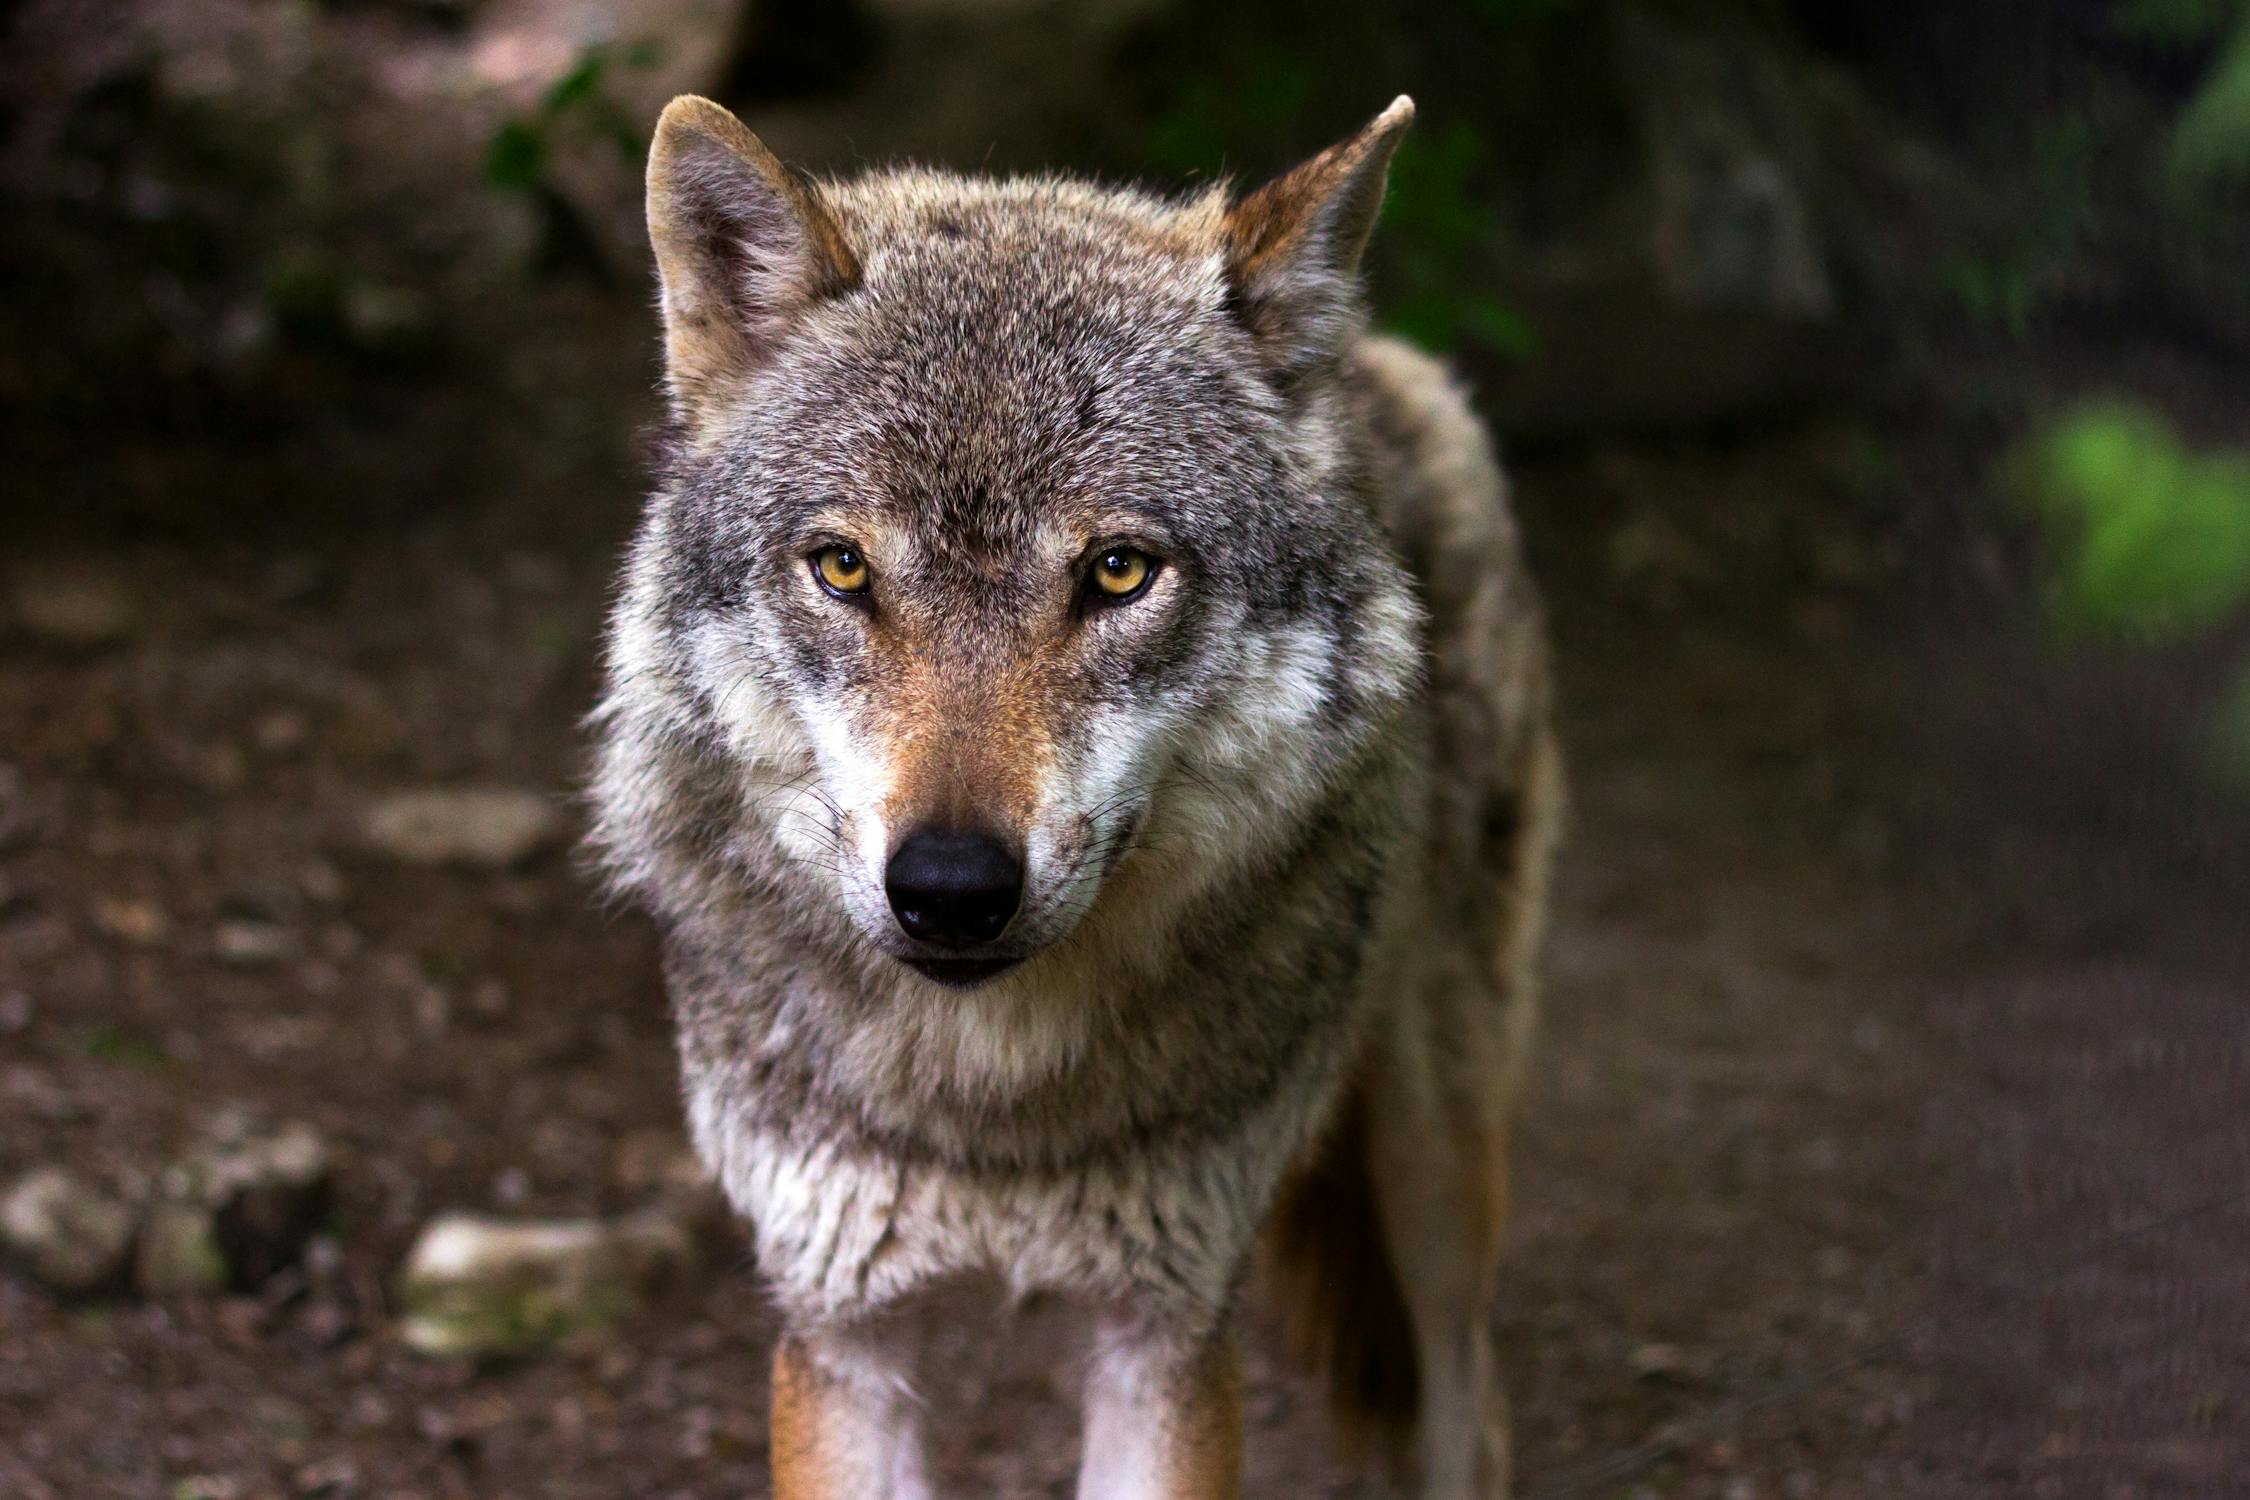 wolf Photo by Pixabay from Pexels: https://www.pexels.com/photo/gray-and-white-wolf-39310/